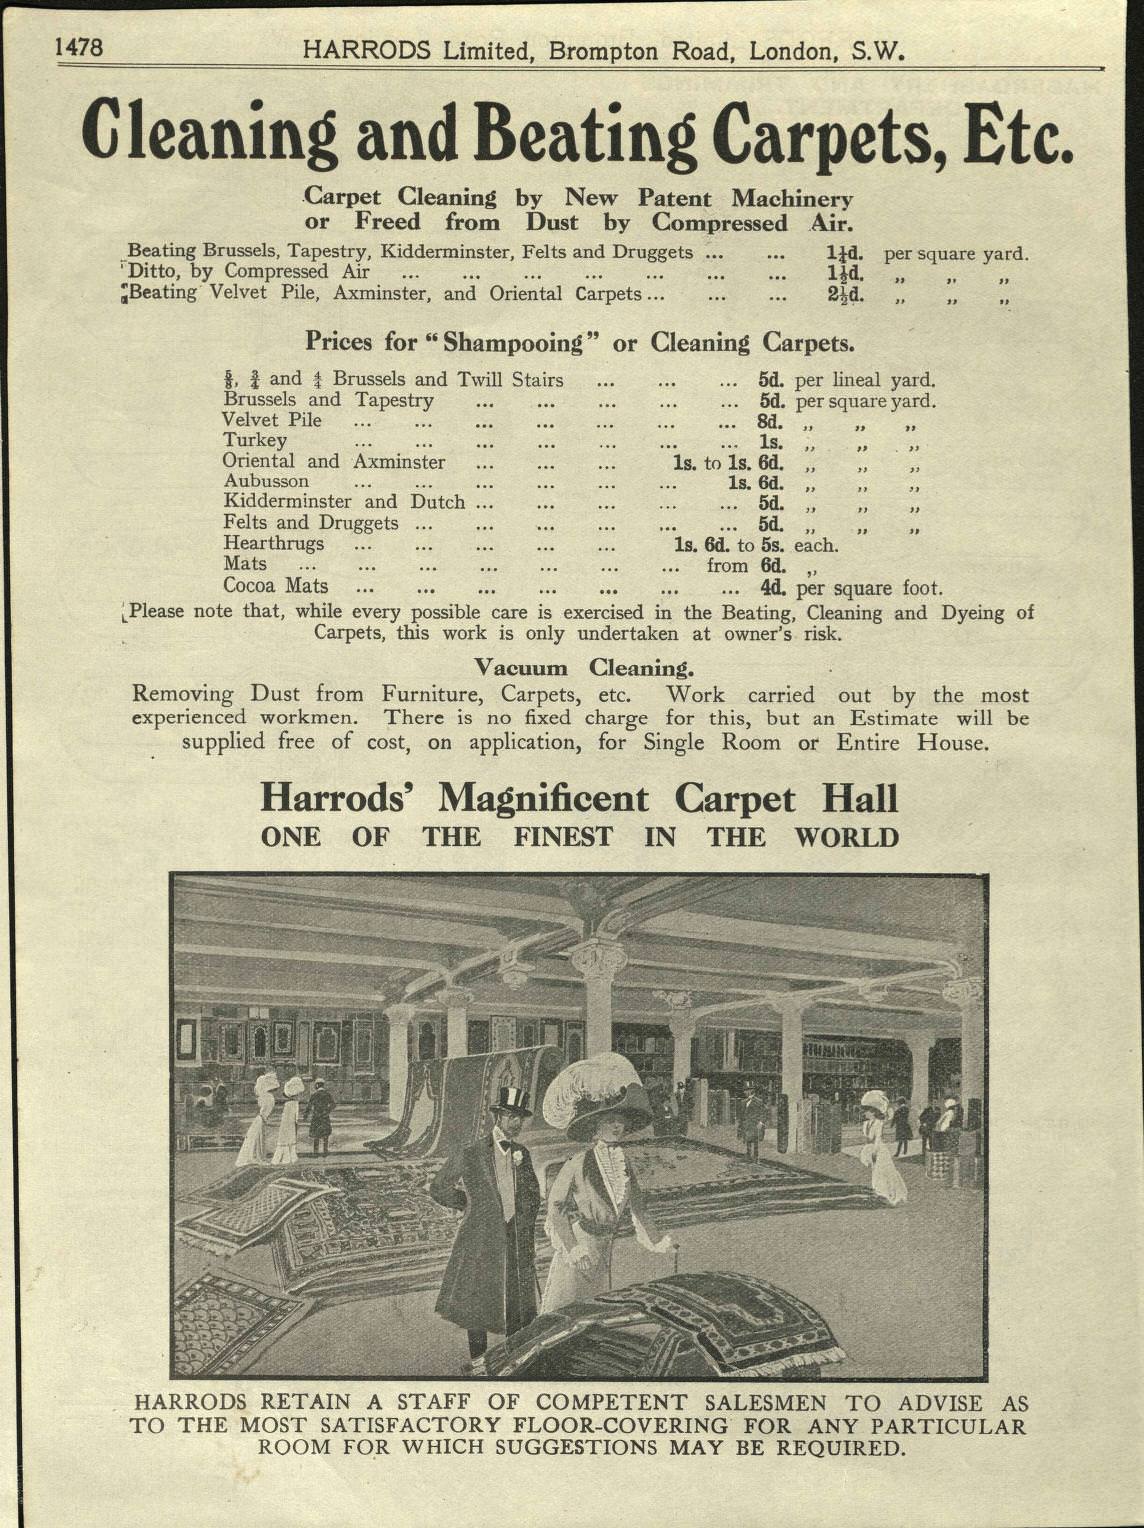 Harrods for Everything: The London Department Store of the 1910s that Was the Amazon of Its day